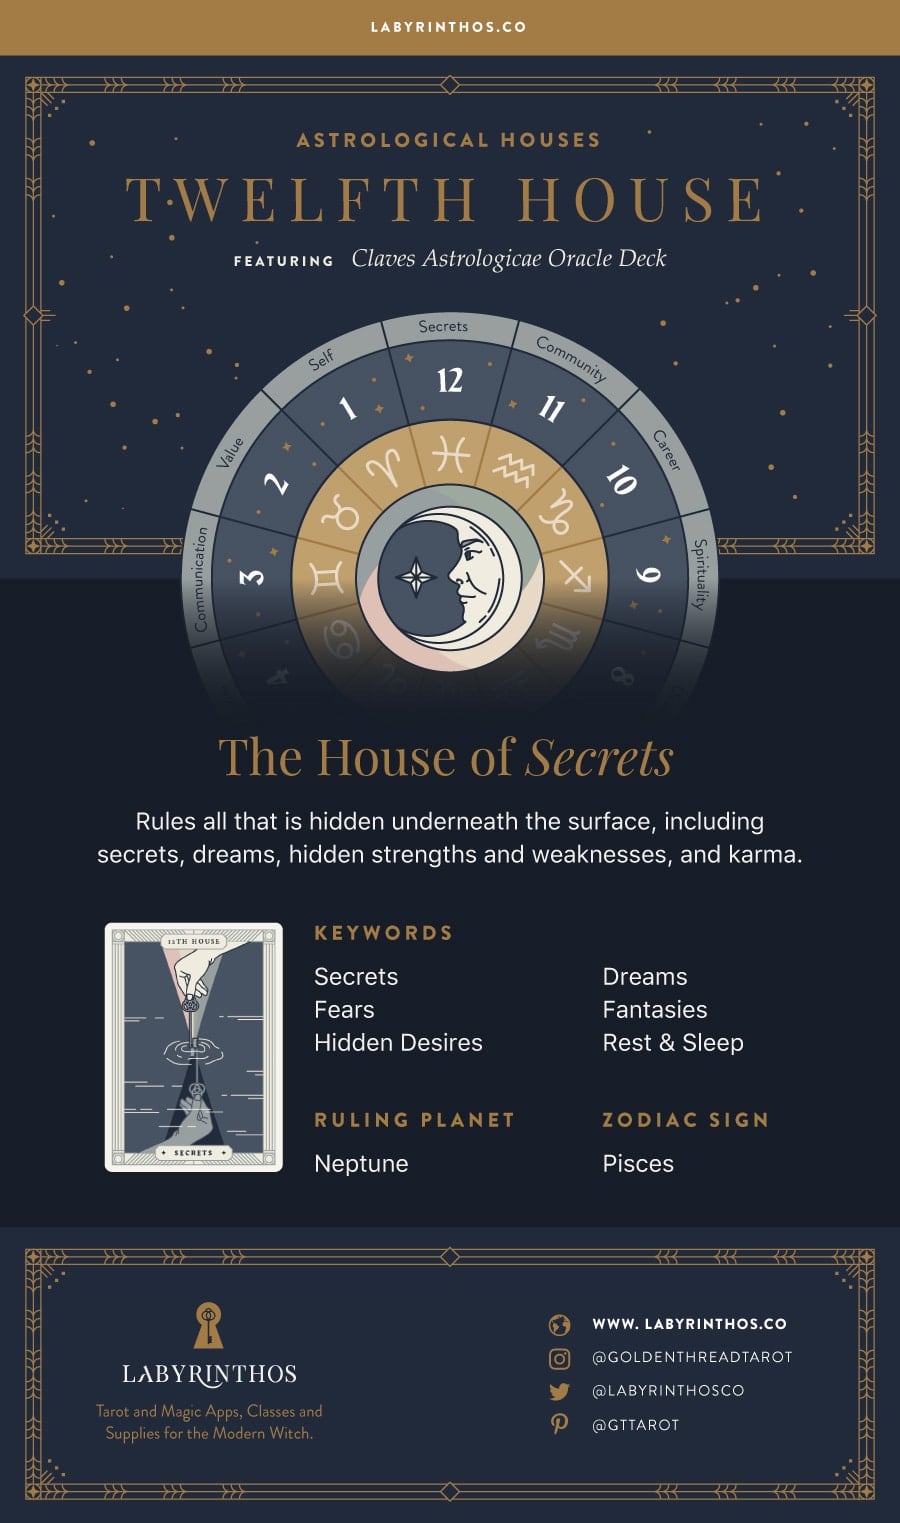 The Twelfth House: The House of Secrets - the 12 Houses of Astrology Infographic